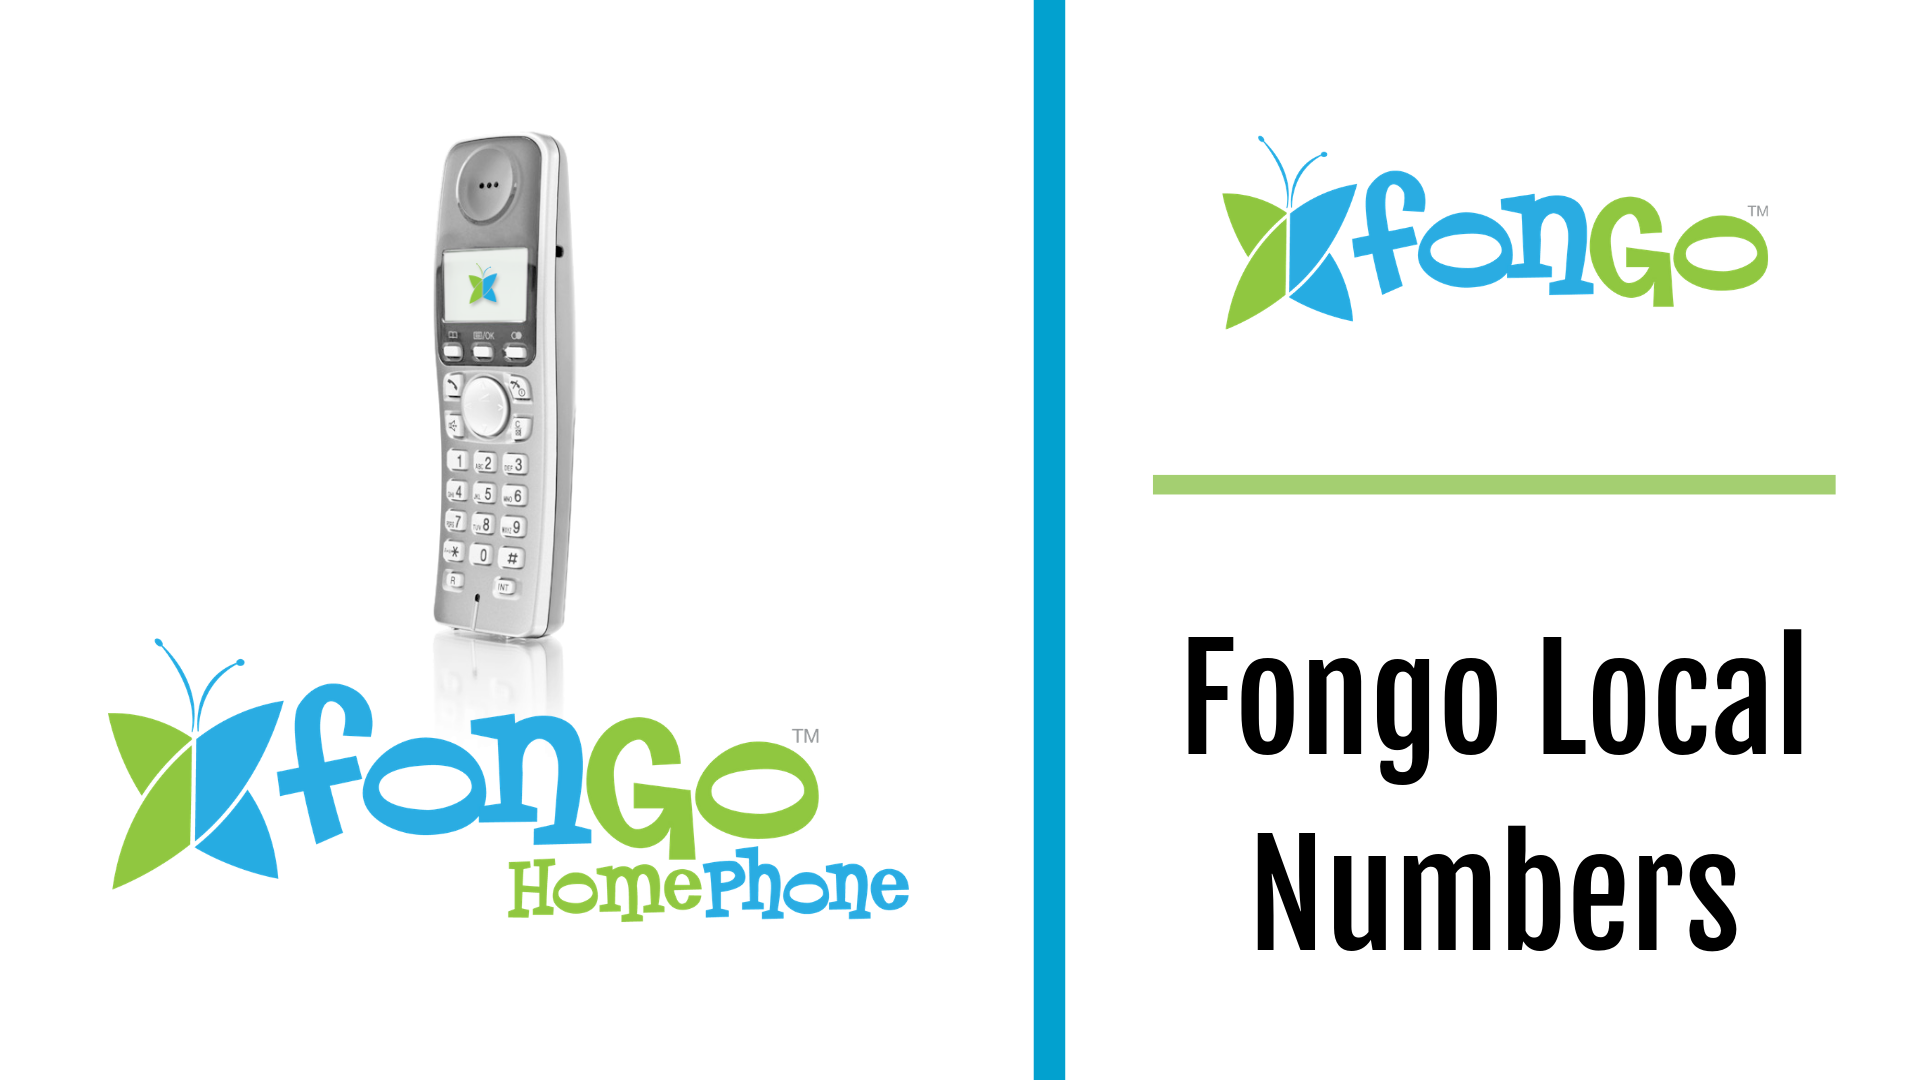 What local numbers does Fongo Mobile provide